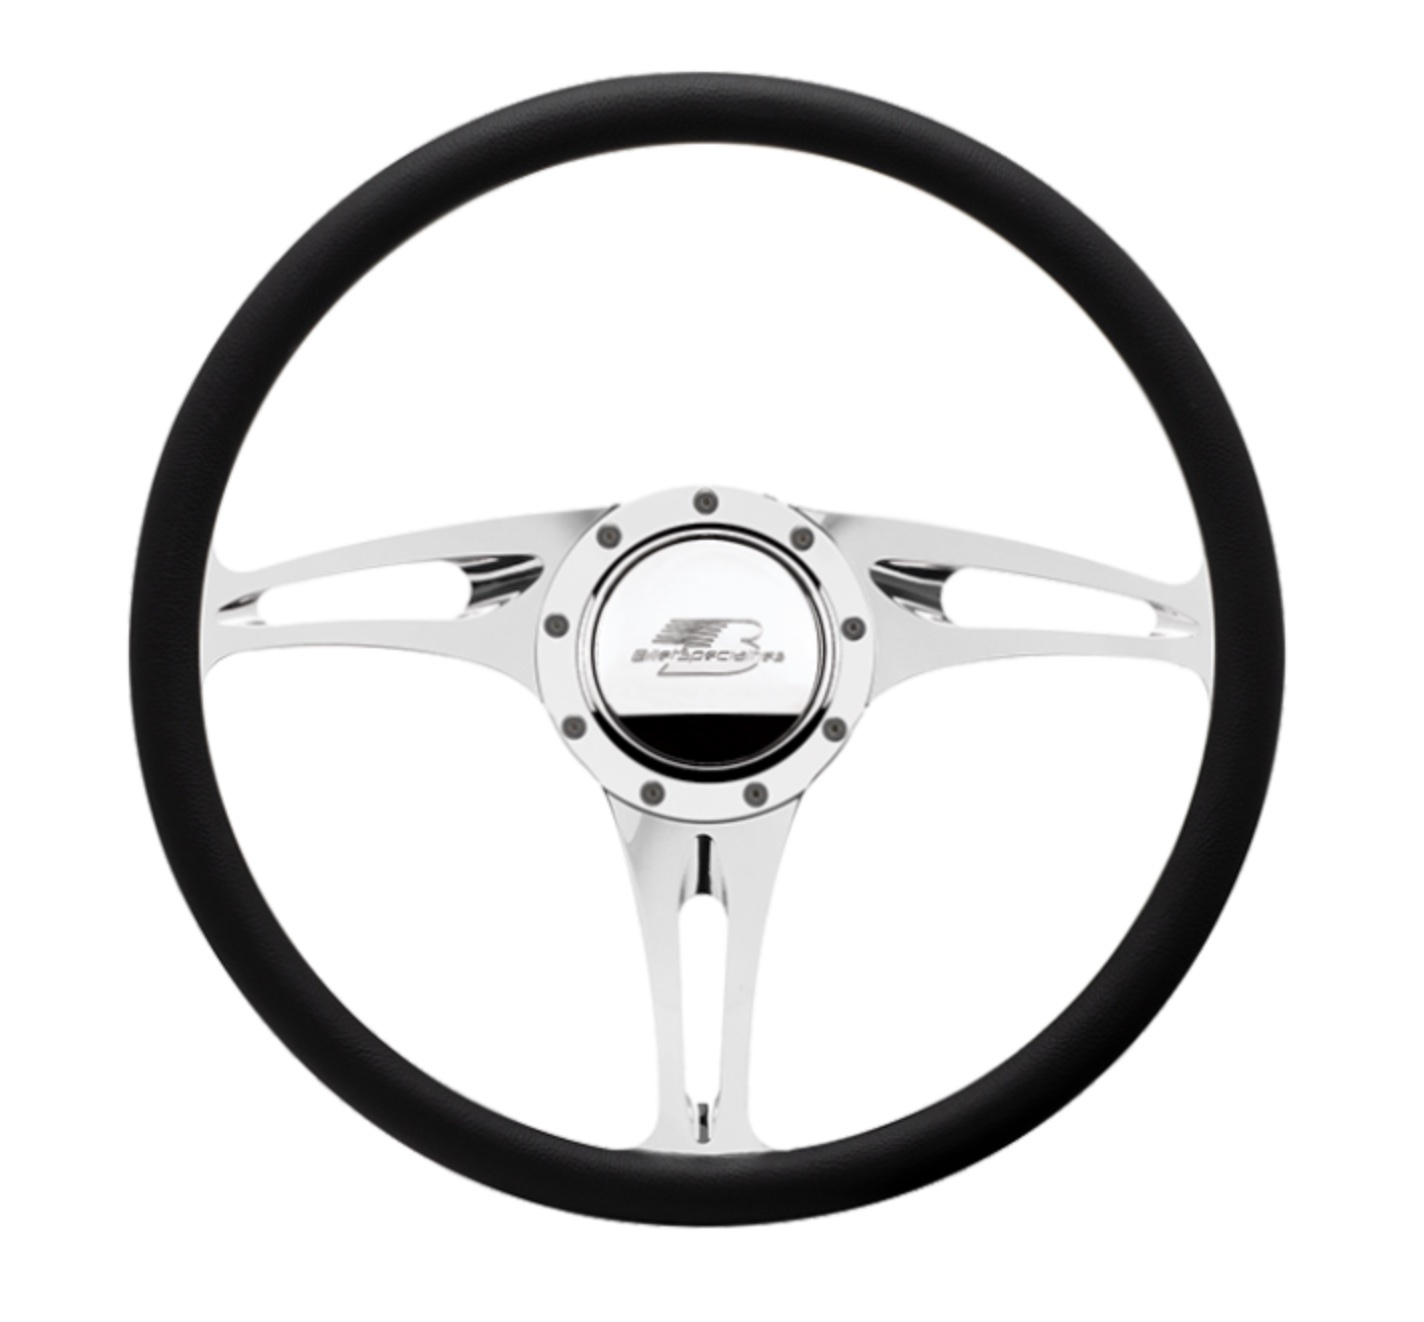 Billet Specialities 34322 Steering Wheel, Stealth, 15-1/2 in Diameter, 2 in Dish, 3-Spoke, Milled Finger Notches, Aluminum, Polished, Each